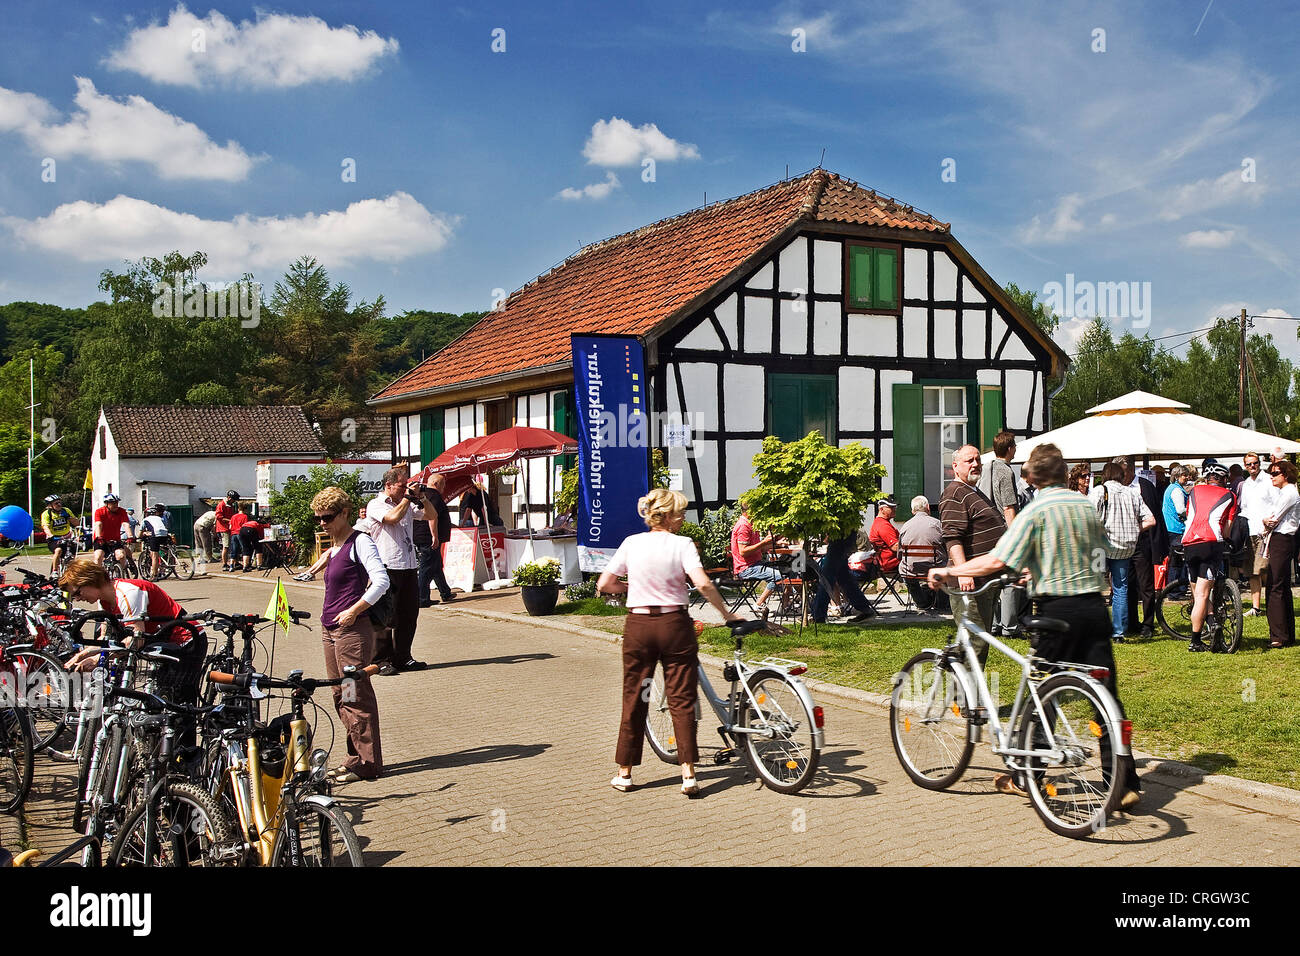 visitors on bicycle festival at old half-timbered house next to Ruhr Valley Cycleway, Germany, North Rhine-Westphalia, Ruhr Area, Witten Stock Photo